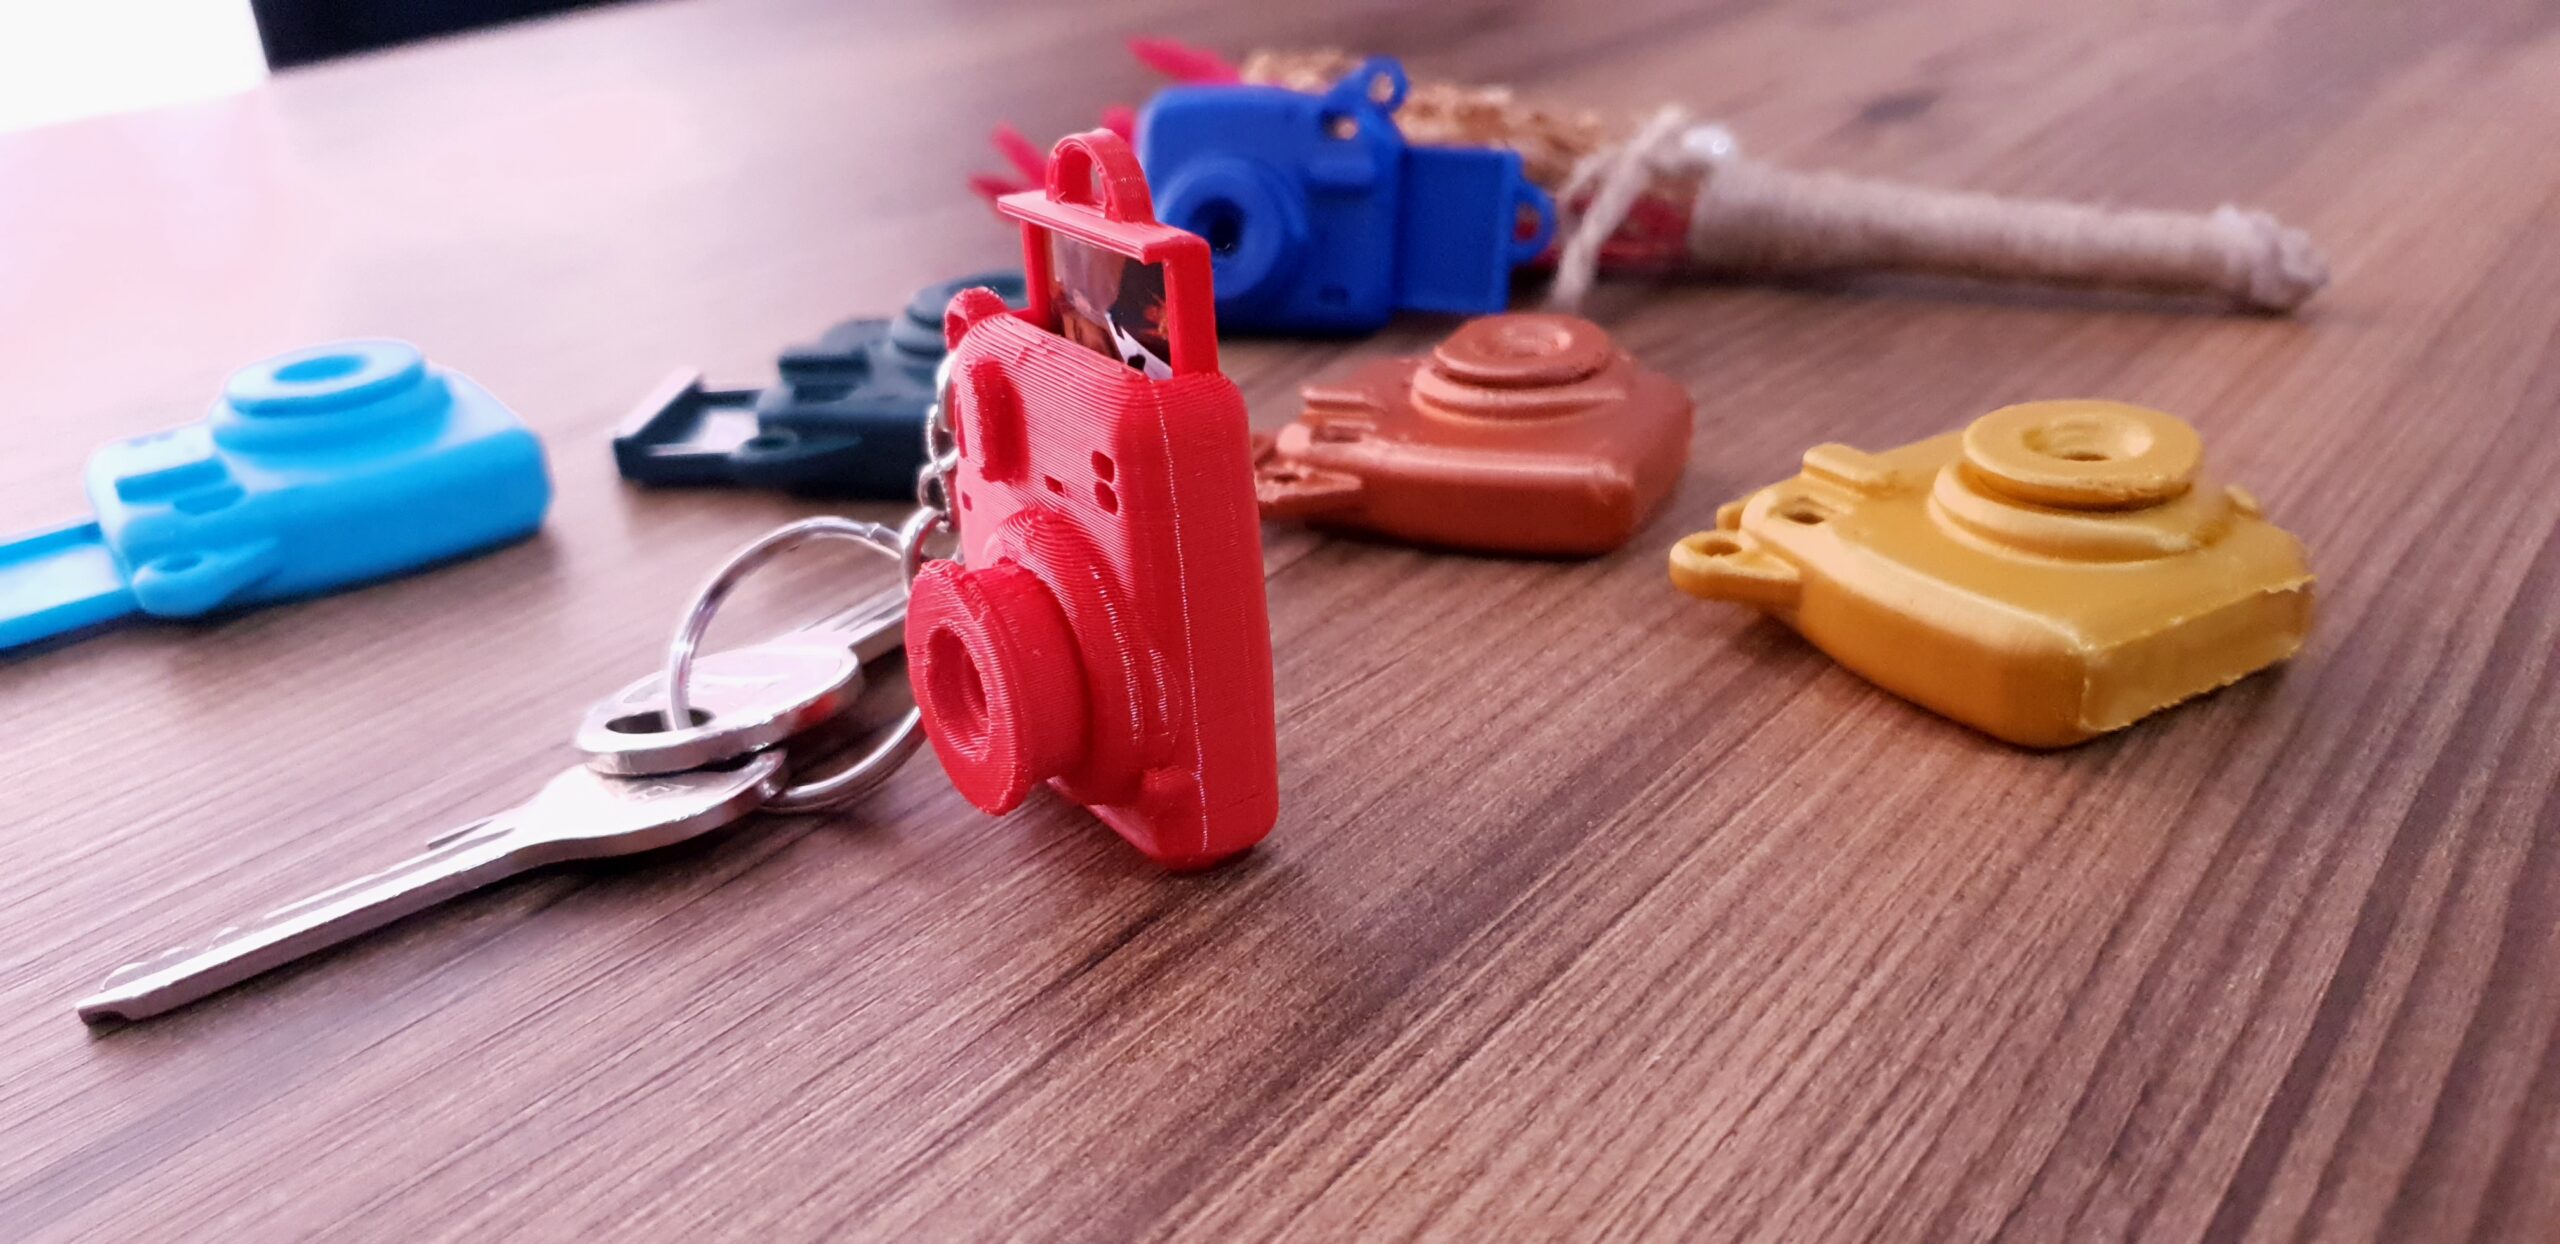 3D Printed Keychains and Key Hangers | 10 Models to 3D Print